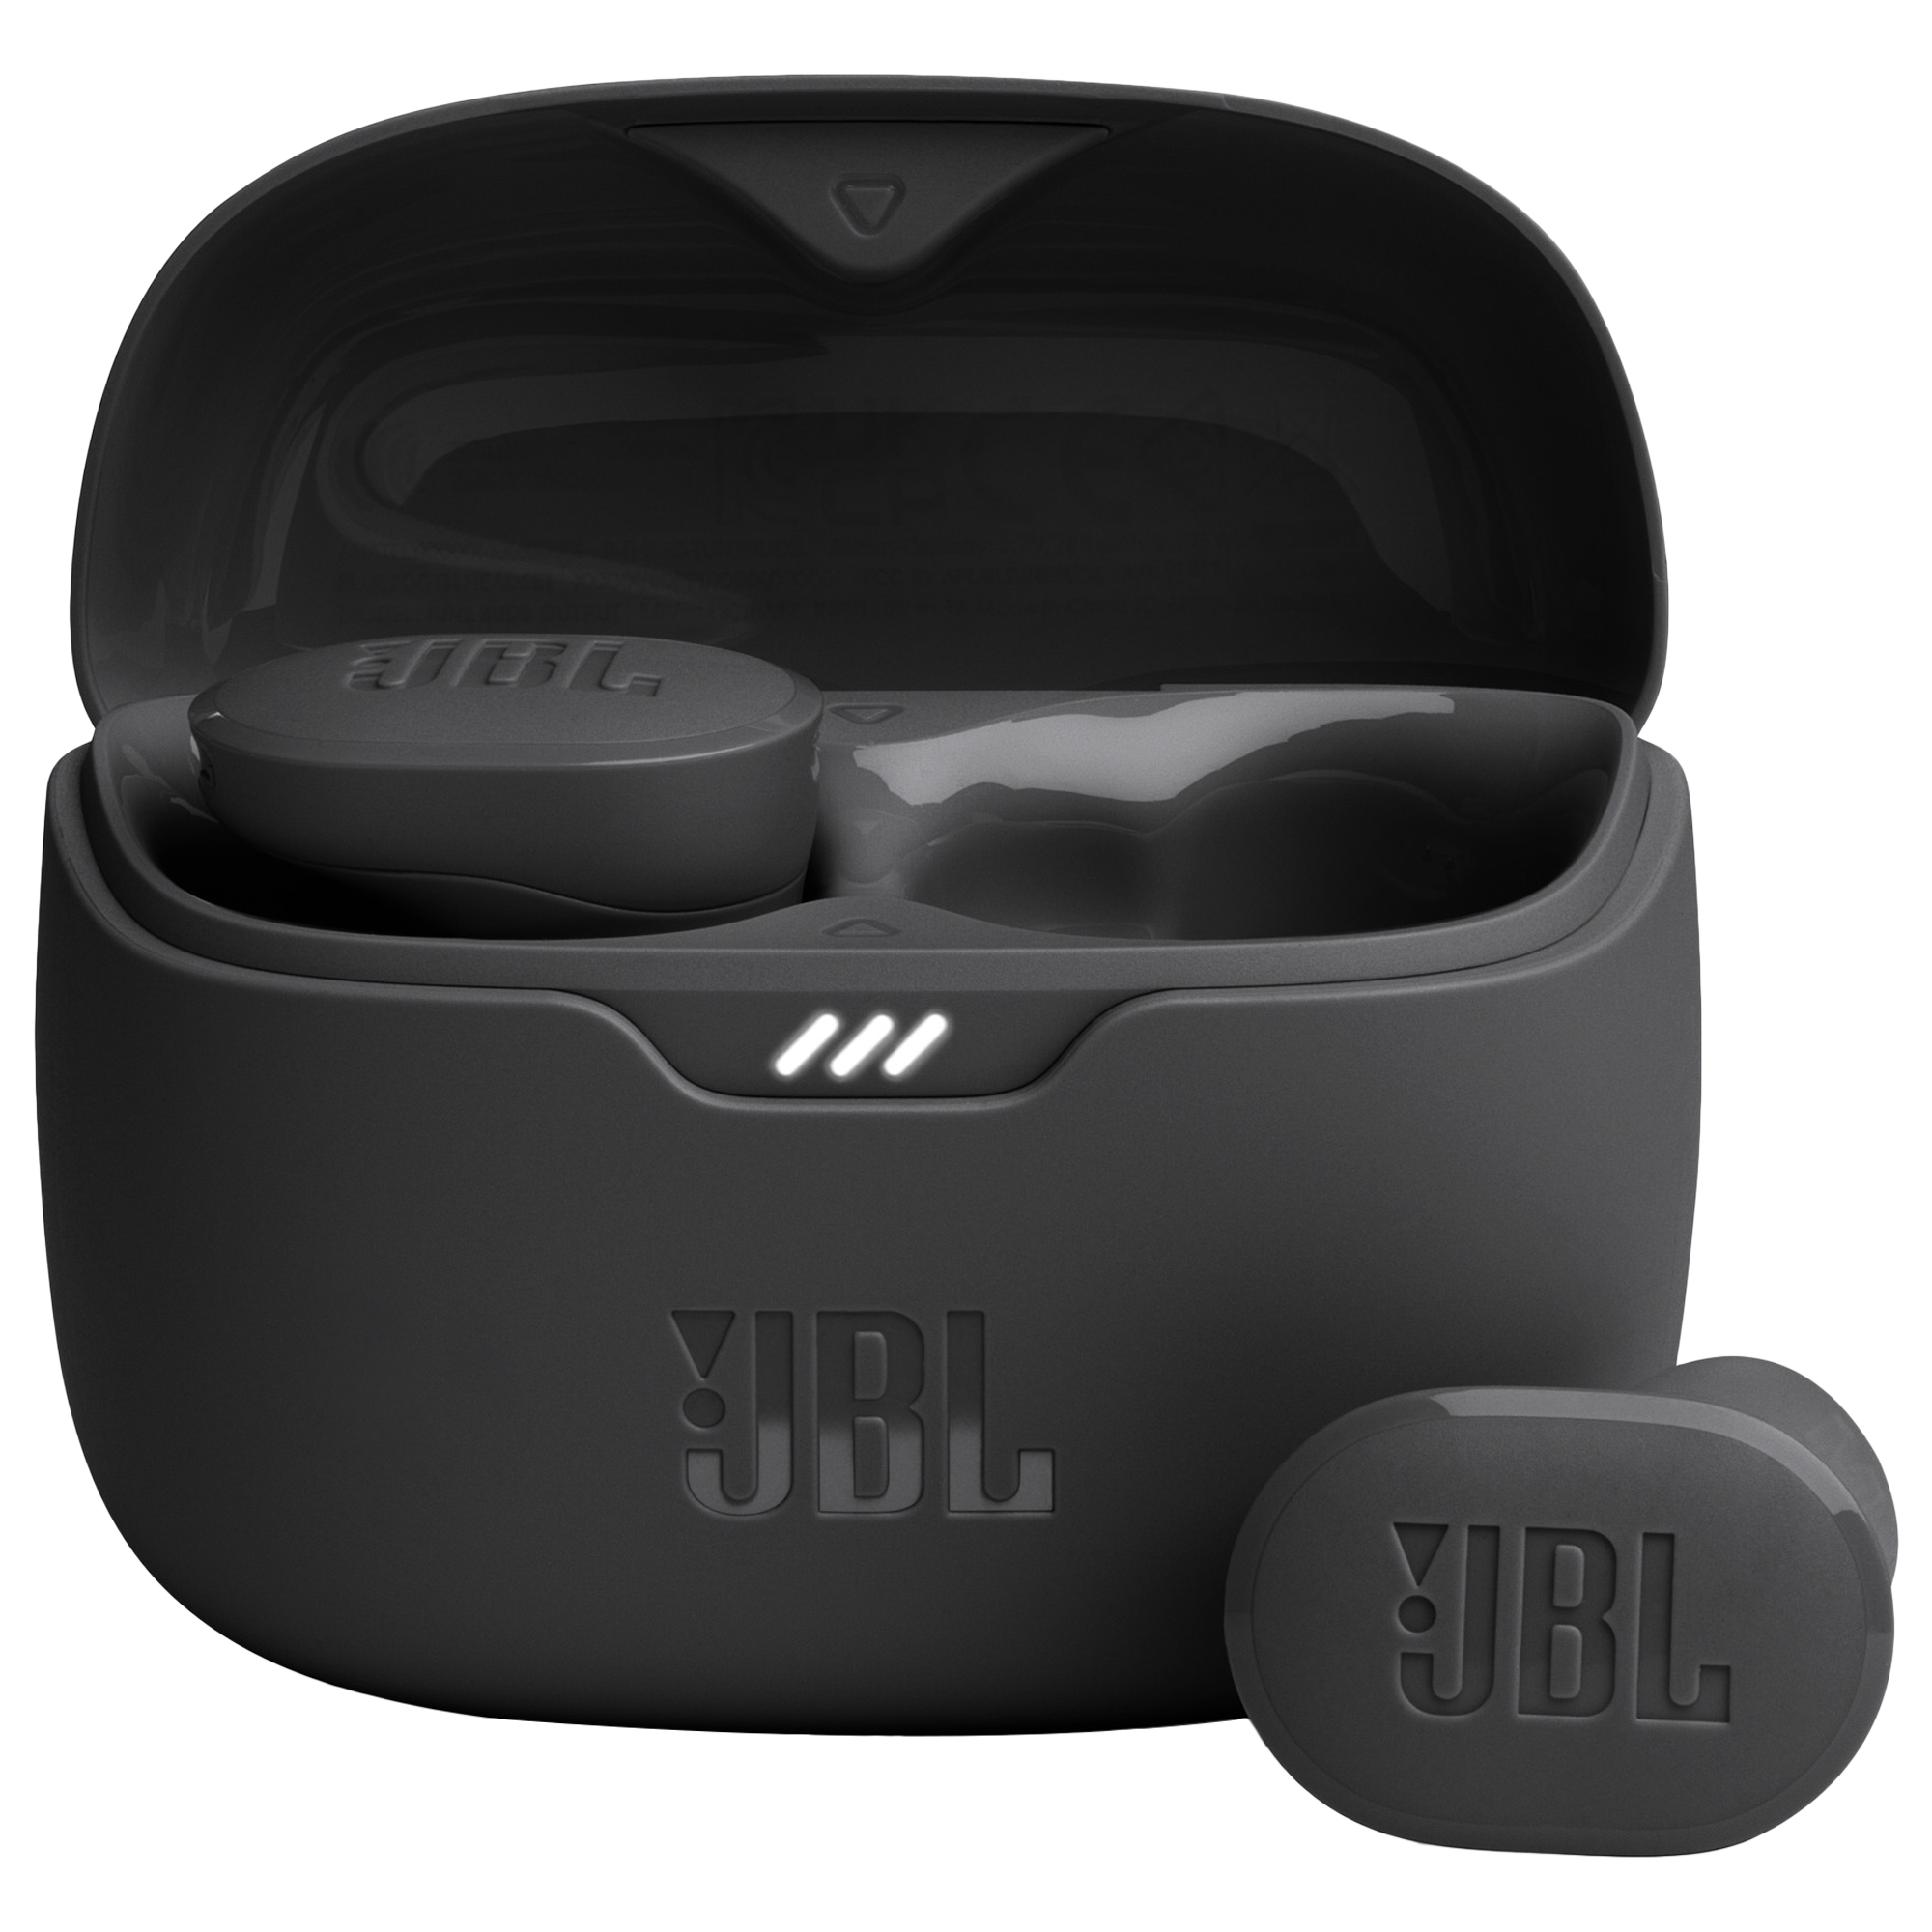 JBL Tune Buds JBLTBUDSBLK TWS Earbuds with Active Noise Cancellation (IP54 Water Resistant, Pure Bass Sound, Black)